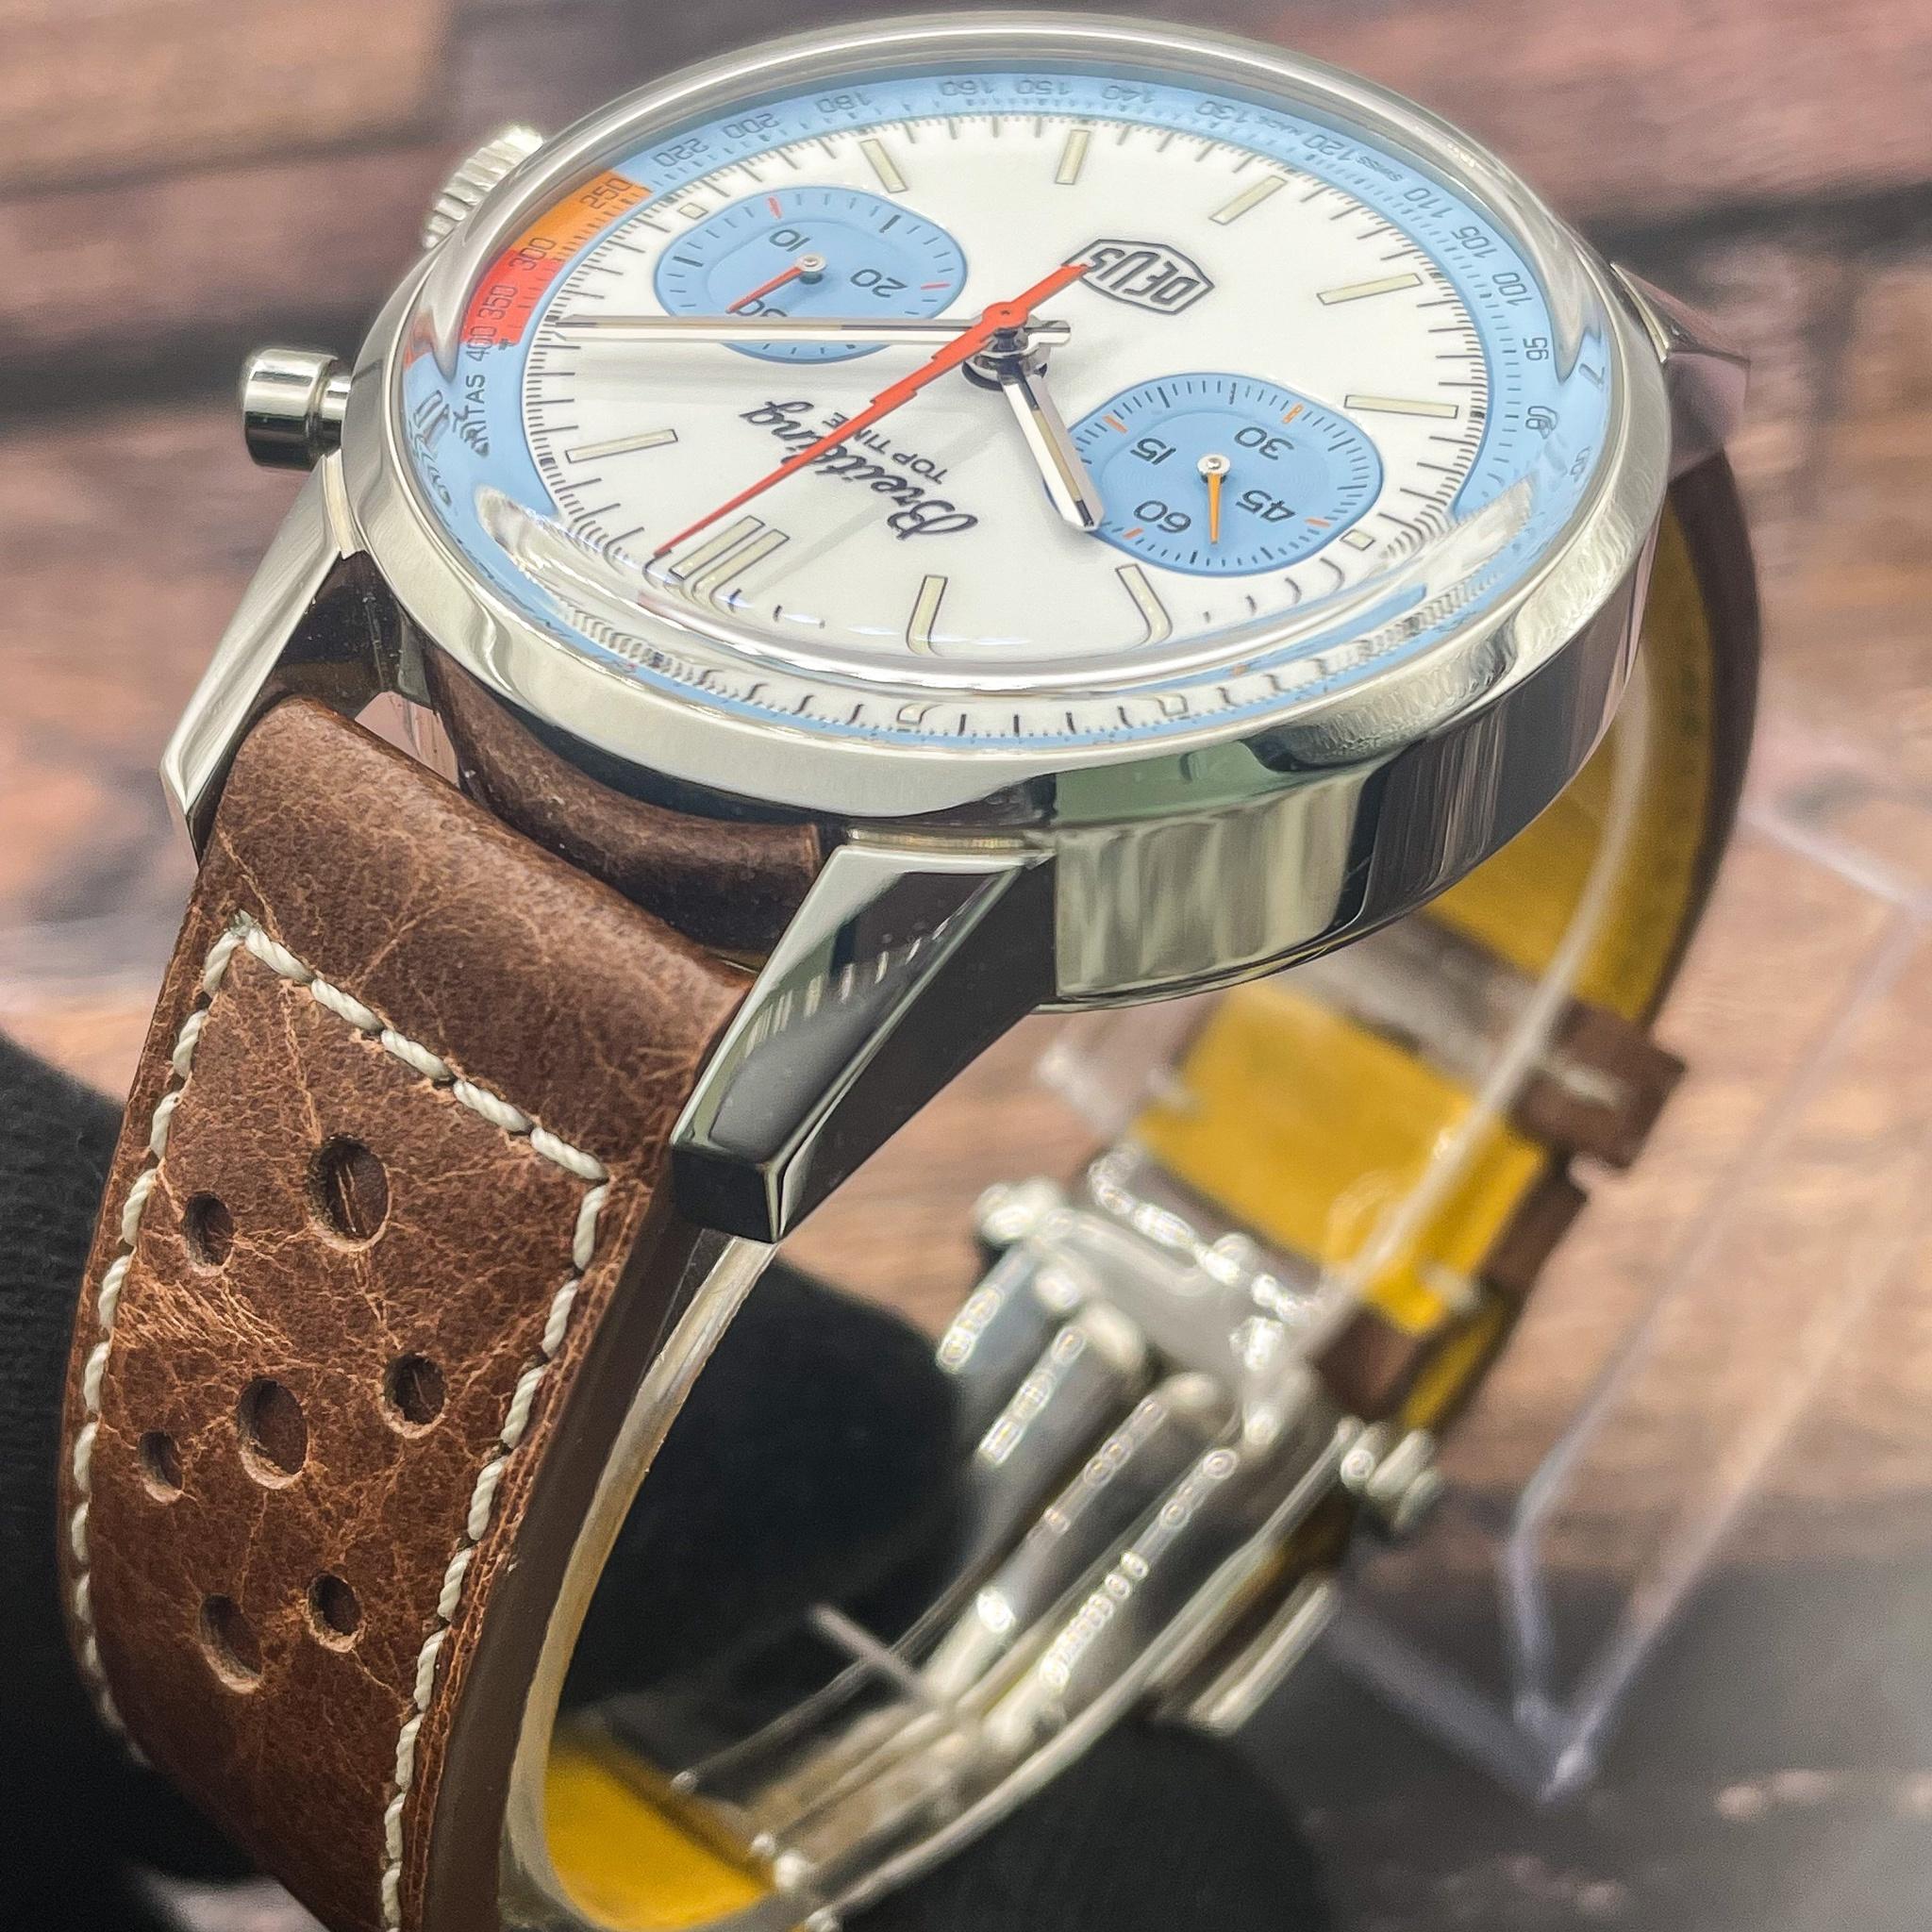 WTS] Breitling Top Time Deus Limited Edition One of 2000 41mm B&P